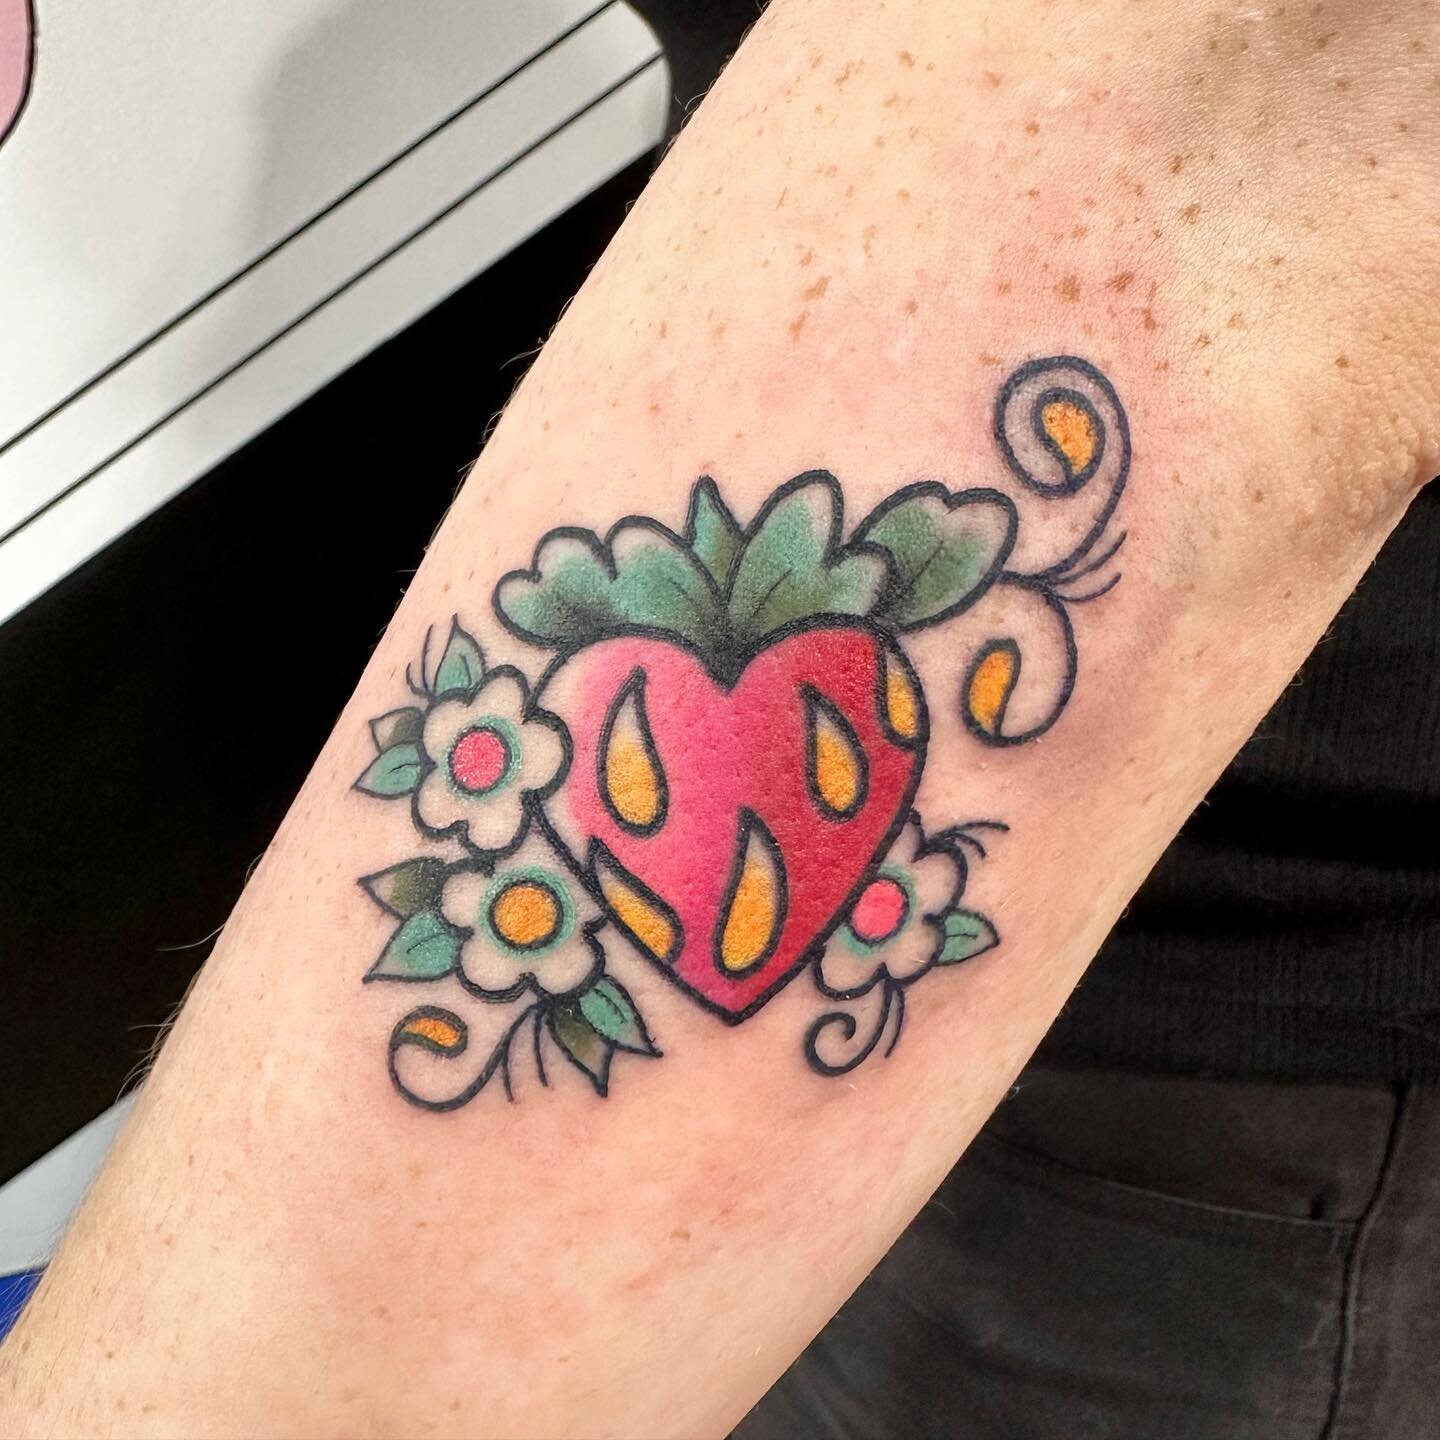 🍓Strawberry🍓 for my pal @kerbside_violets! Thank you for the good company. #strawberry #strawberrytattoo #tattoo #tattoos #kankakeecounty #kankakeetattoo #bradleyillinois #chicagotattoo #illinoistattoo